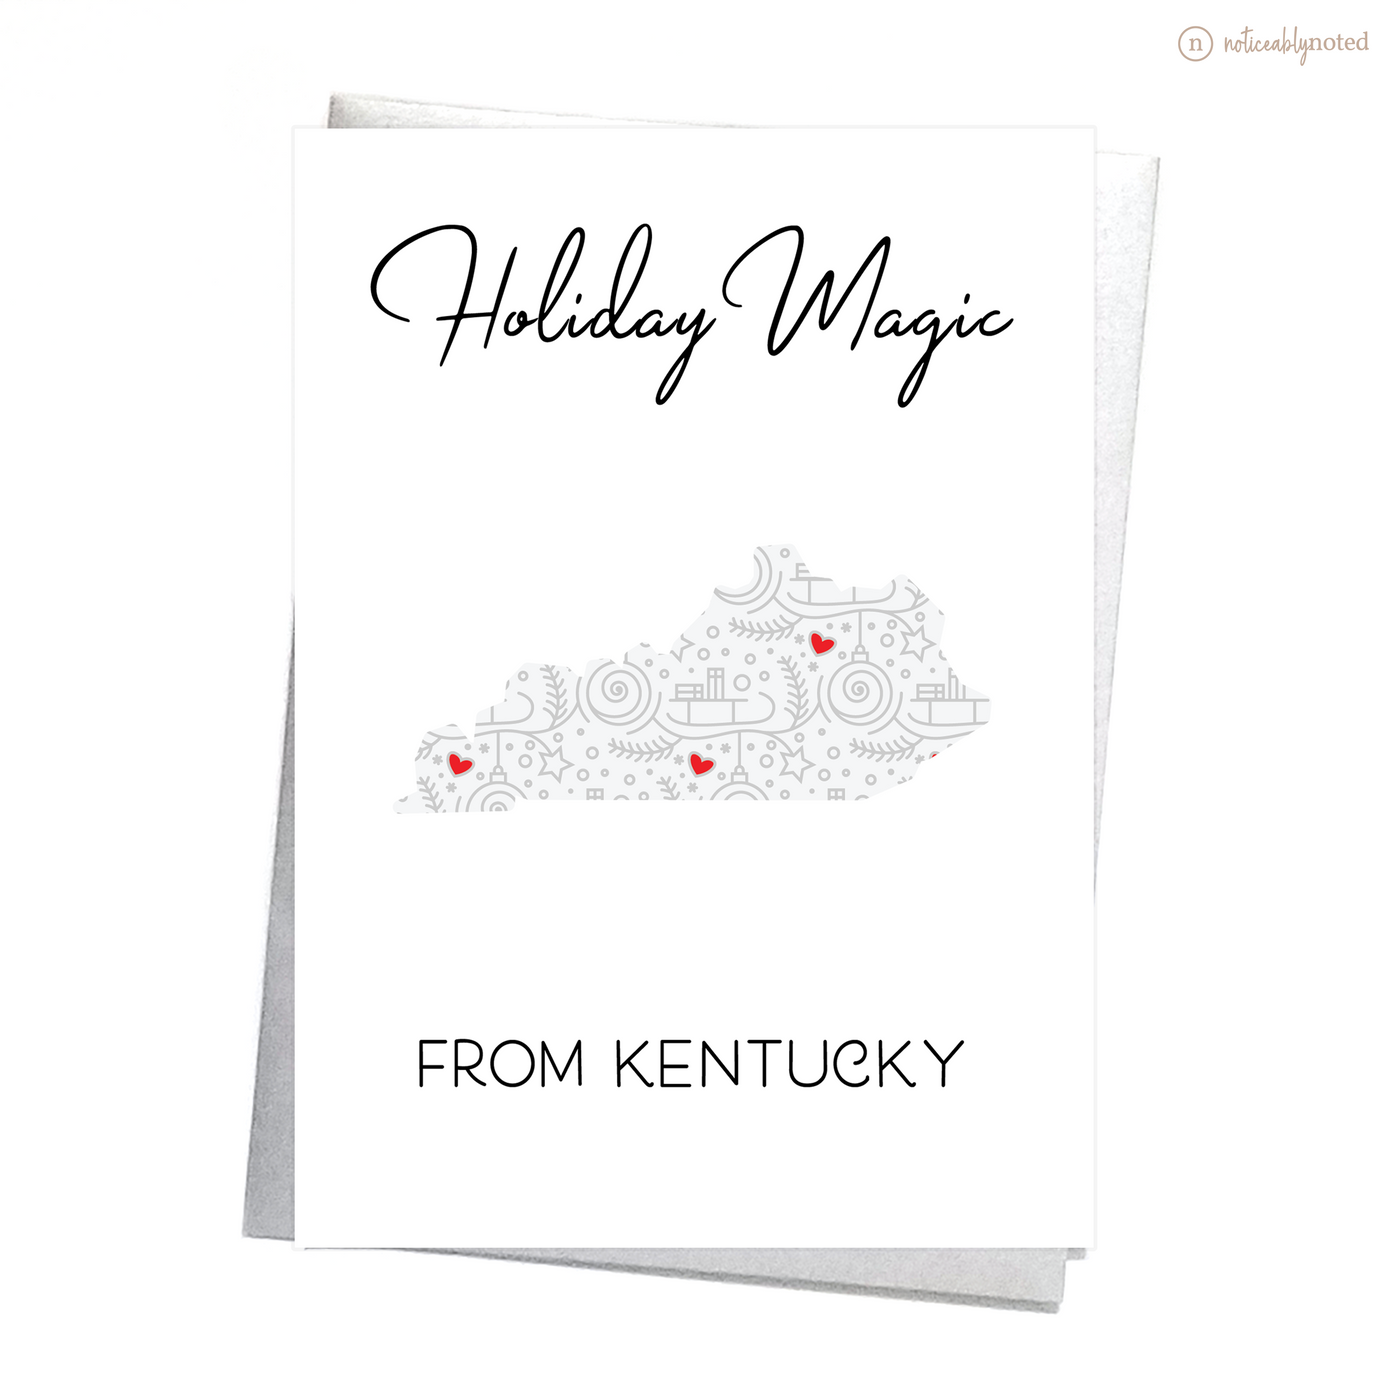 KY Christmas Card | Noticeably Noted